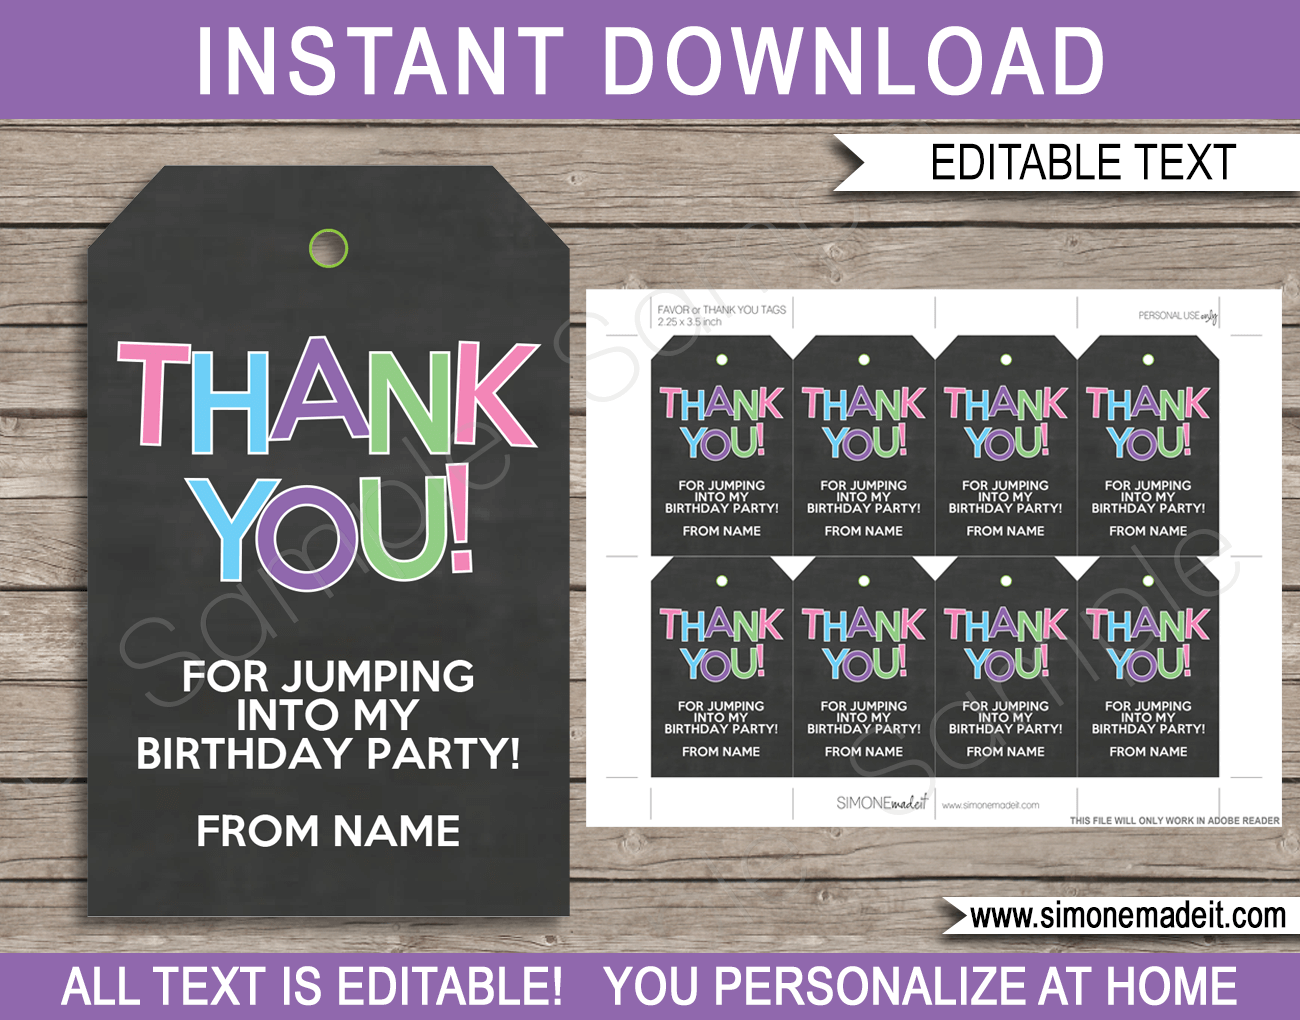 Girls Trampoline Birthday Party Favor Tags | Thank You Tags | Birthday Party | Editable DIY Template | $3.00 INSTANT DOWNLOAD via SIMONEmadeit.com